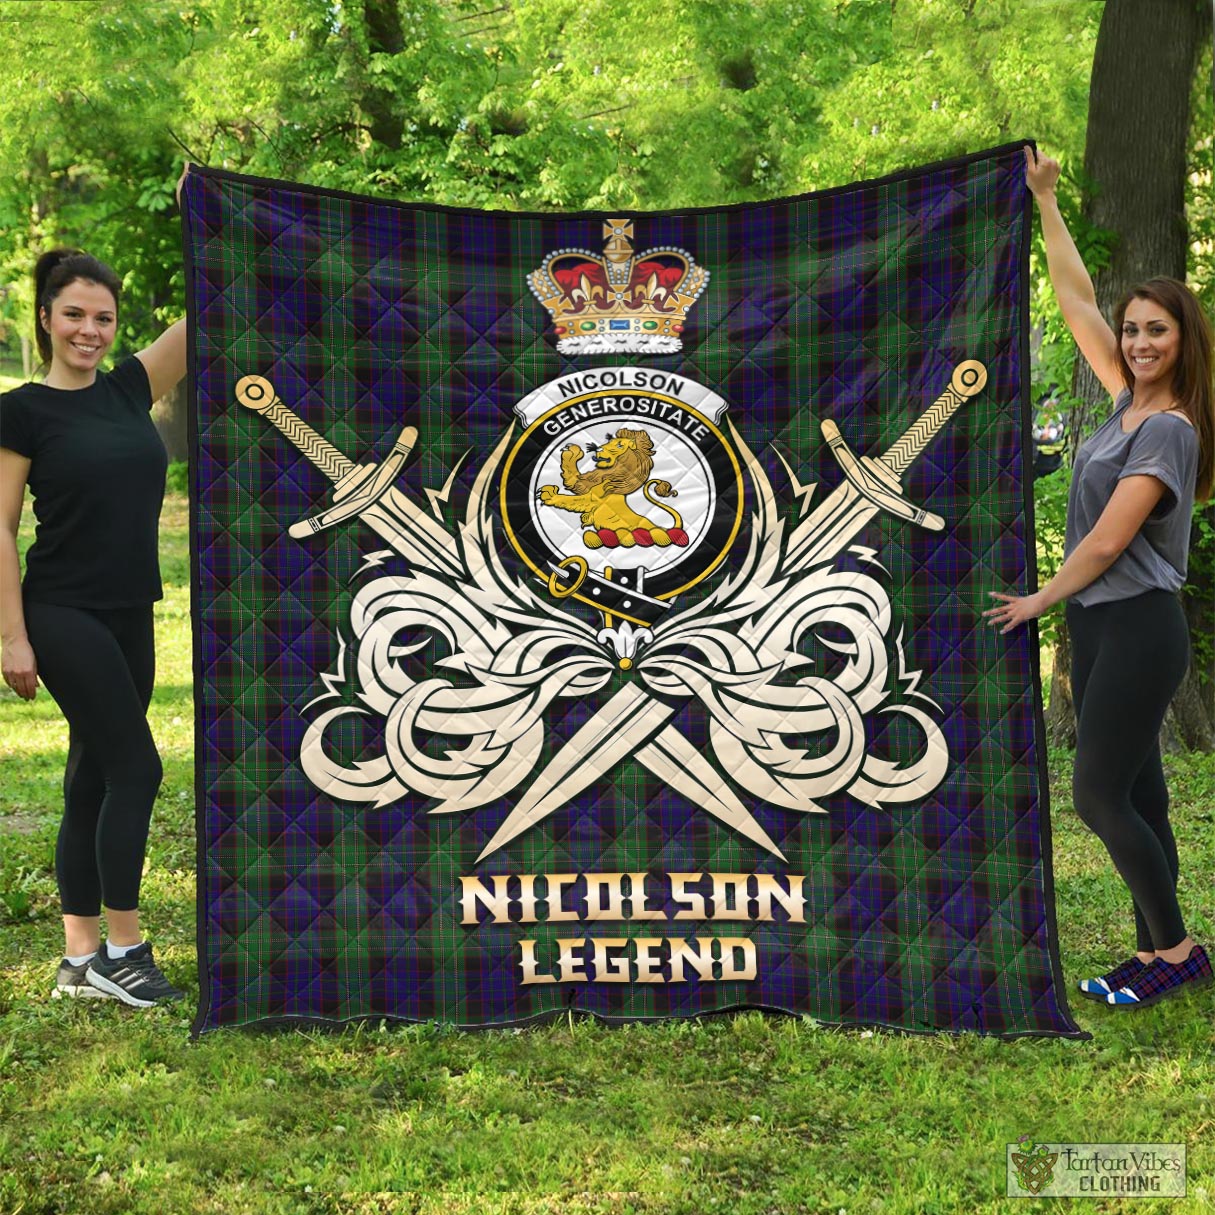 Tartan Vibes Clothing Nicolson Green Hunting Tartan Quilt with Clan Crest and the Golden Sword of Courageous Legacy